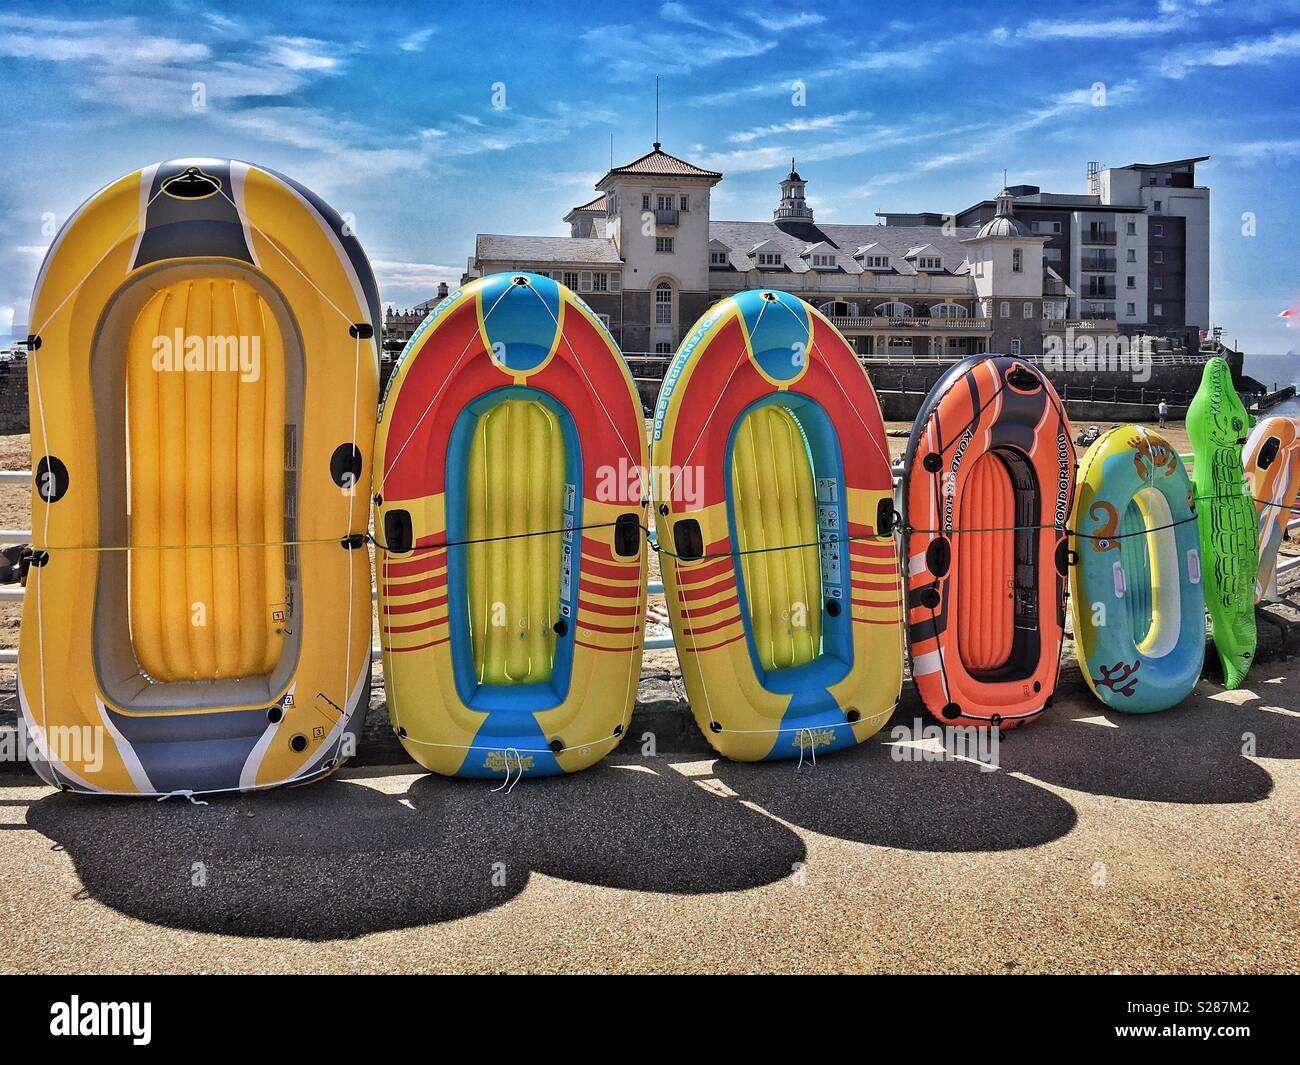 Inflatable dinghies for sale at a stall on the sea front in Weston-super-Mare, UK Stock Photo